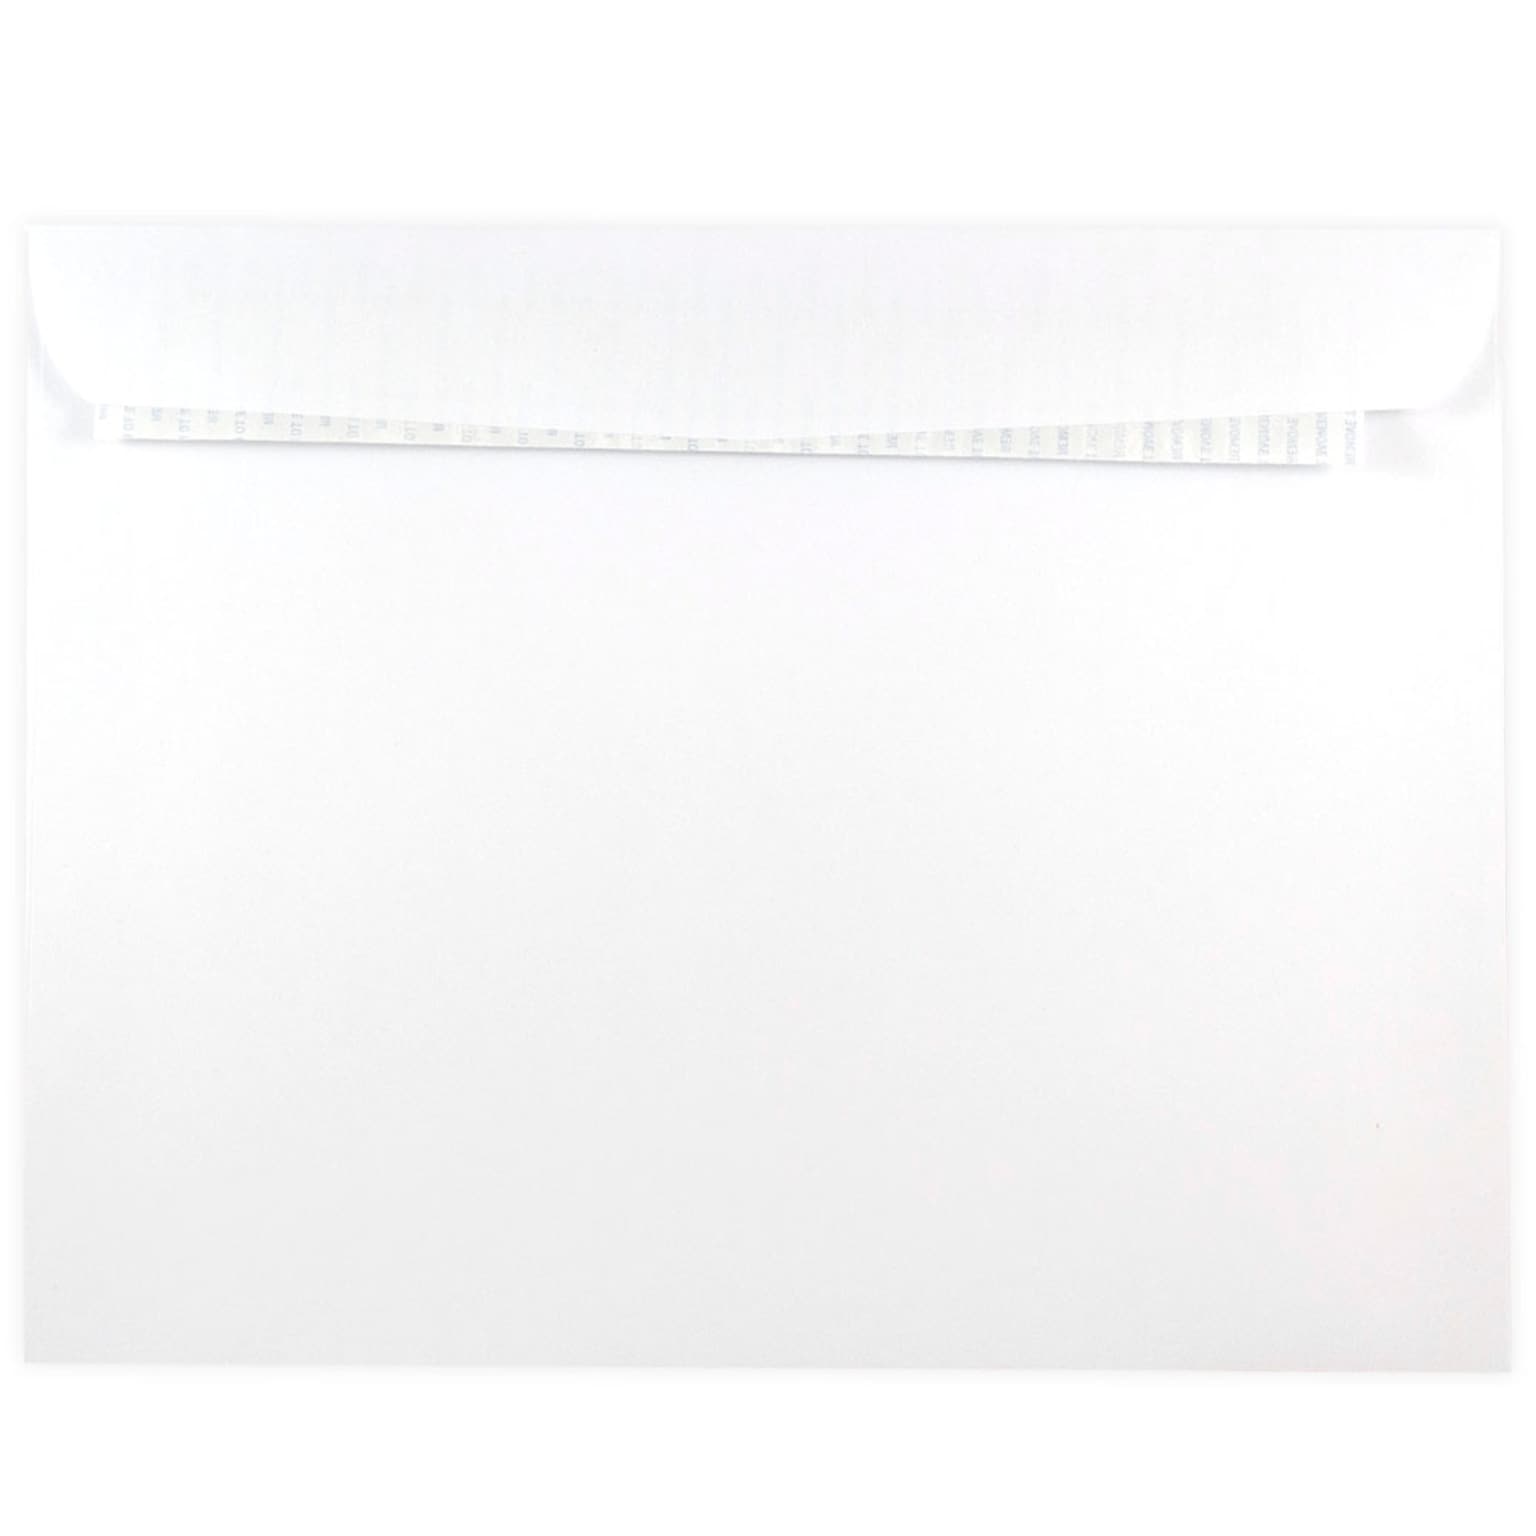 JAM Paper® 10 x 13 Booklet Envelopes with Peel and Seal Closure, White, 25/Pack (356828787A)